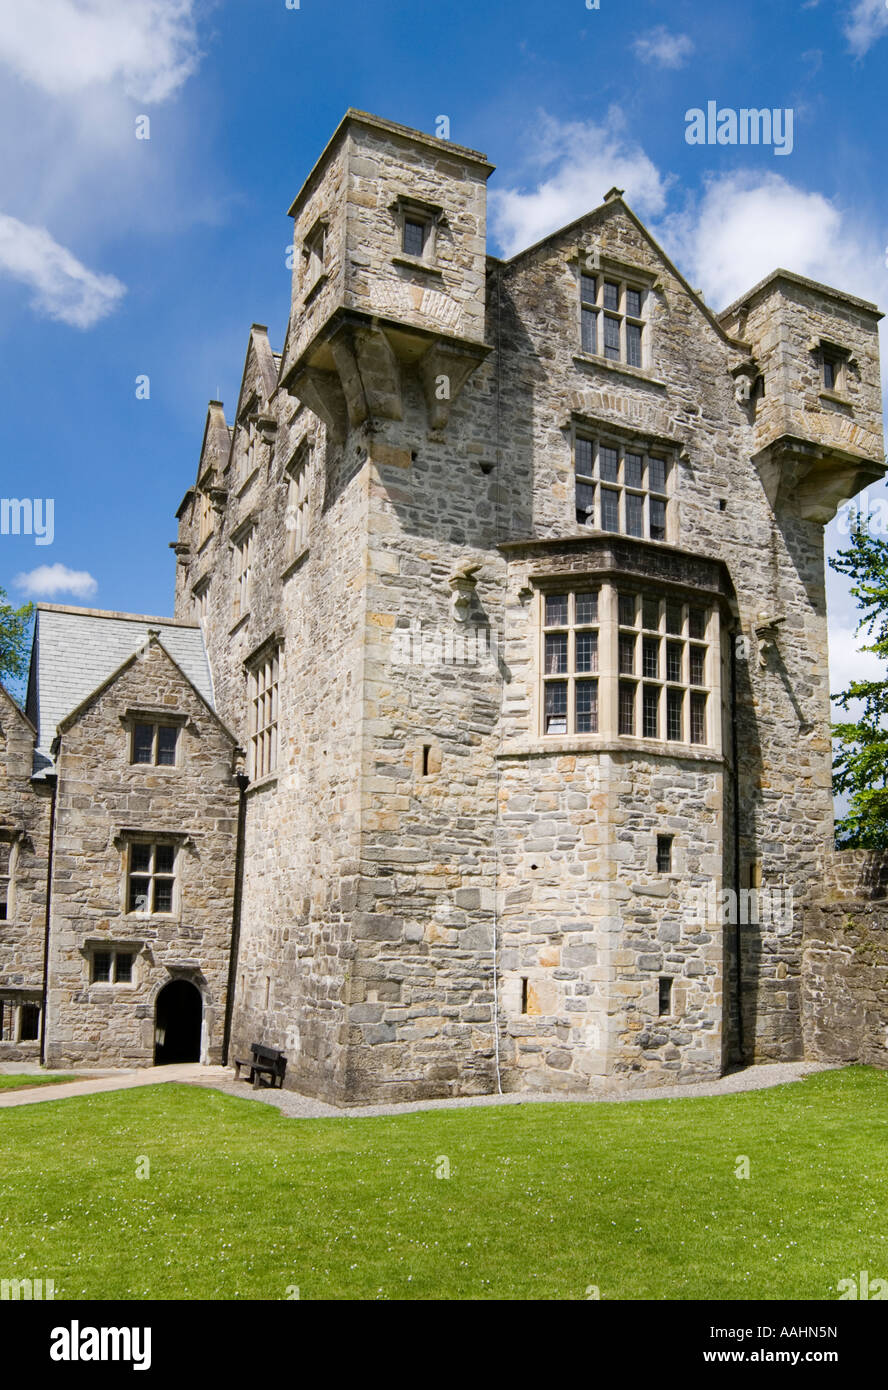 Donegal Castle Donegal Town County Donegal Ireland The Castle keep Stock Photo